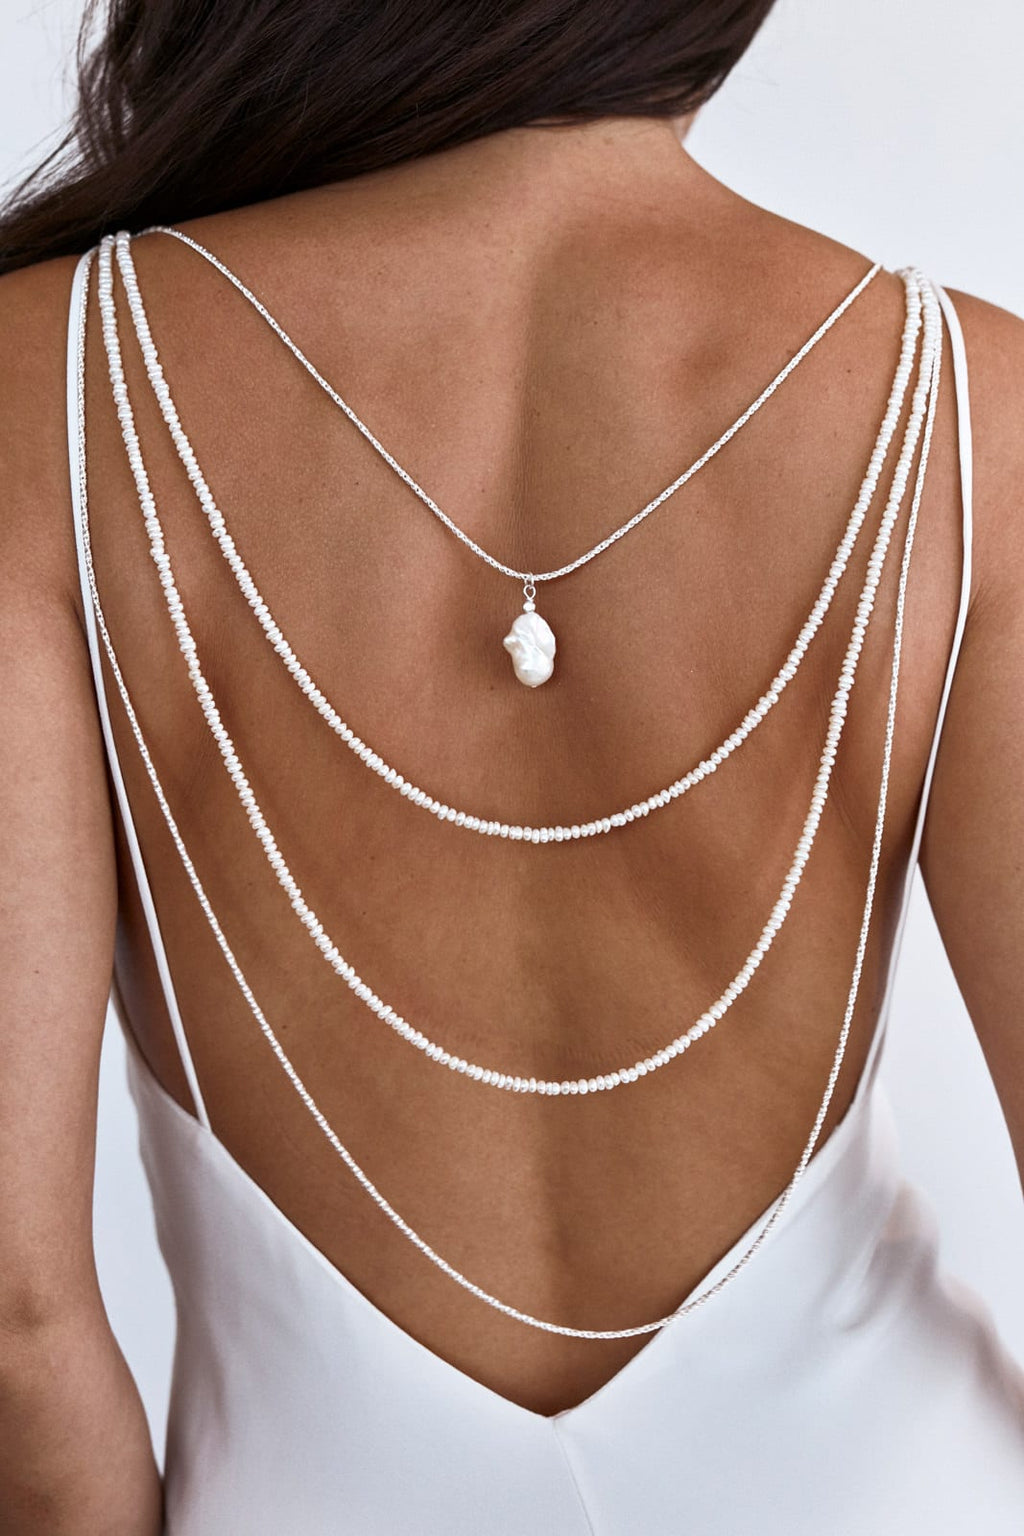 Dropship Three Layer Tassel Jewelry Set With Heart Shaped Pendant Charm  Necklace & Drop Earrings Shiny Jewelry For Women & Girls Wedding Dress  Accessories to Sell Online at a Lower Price